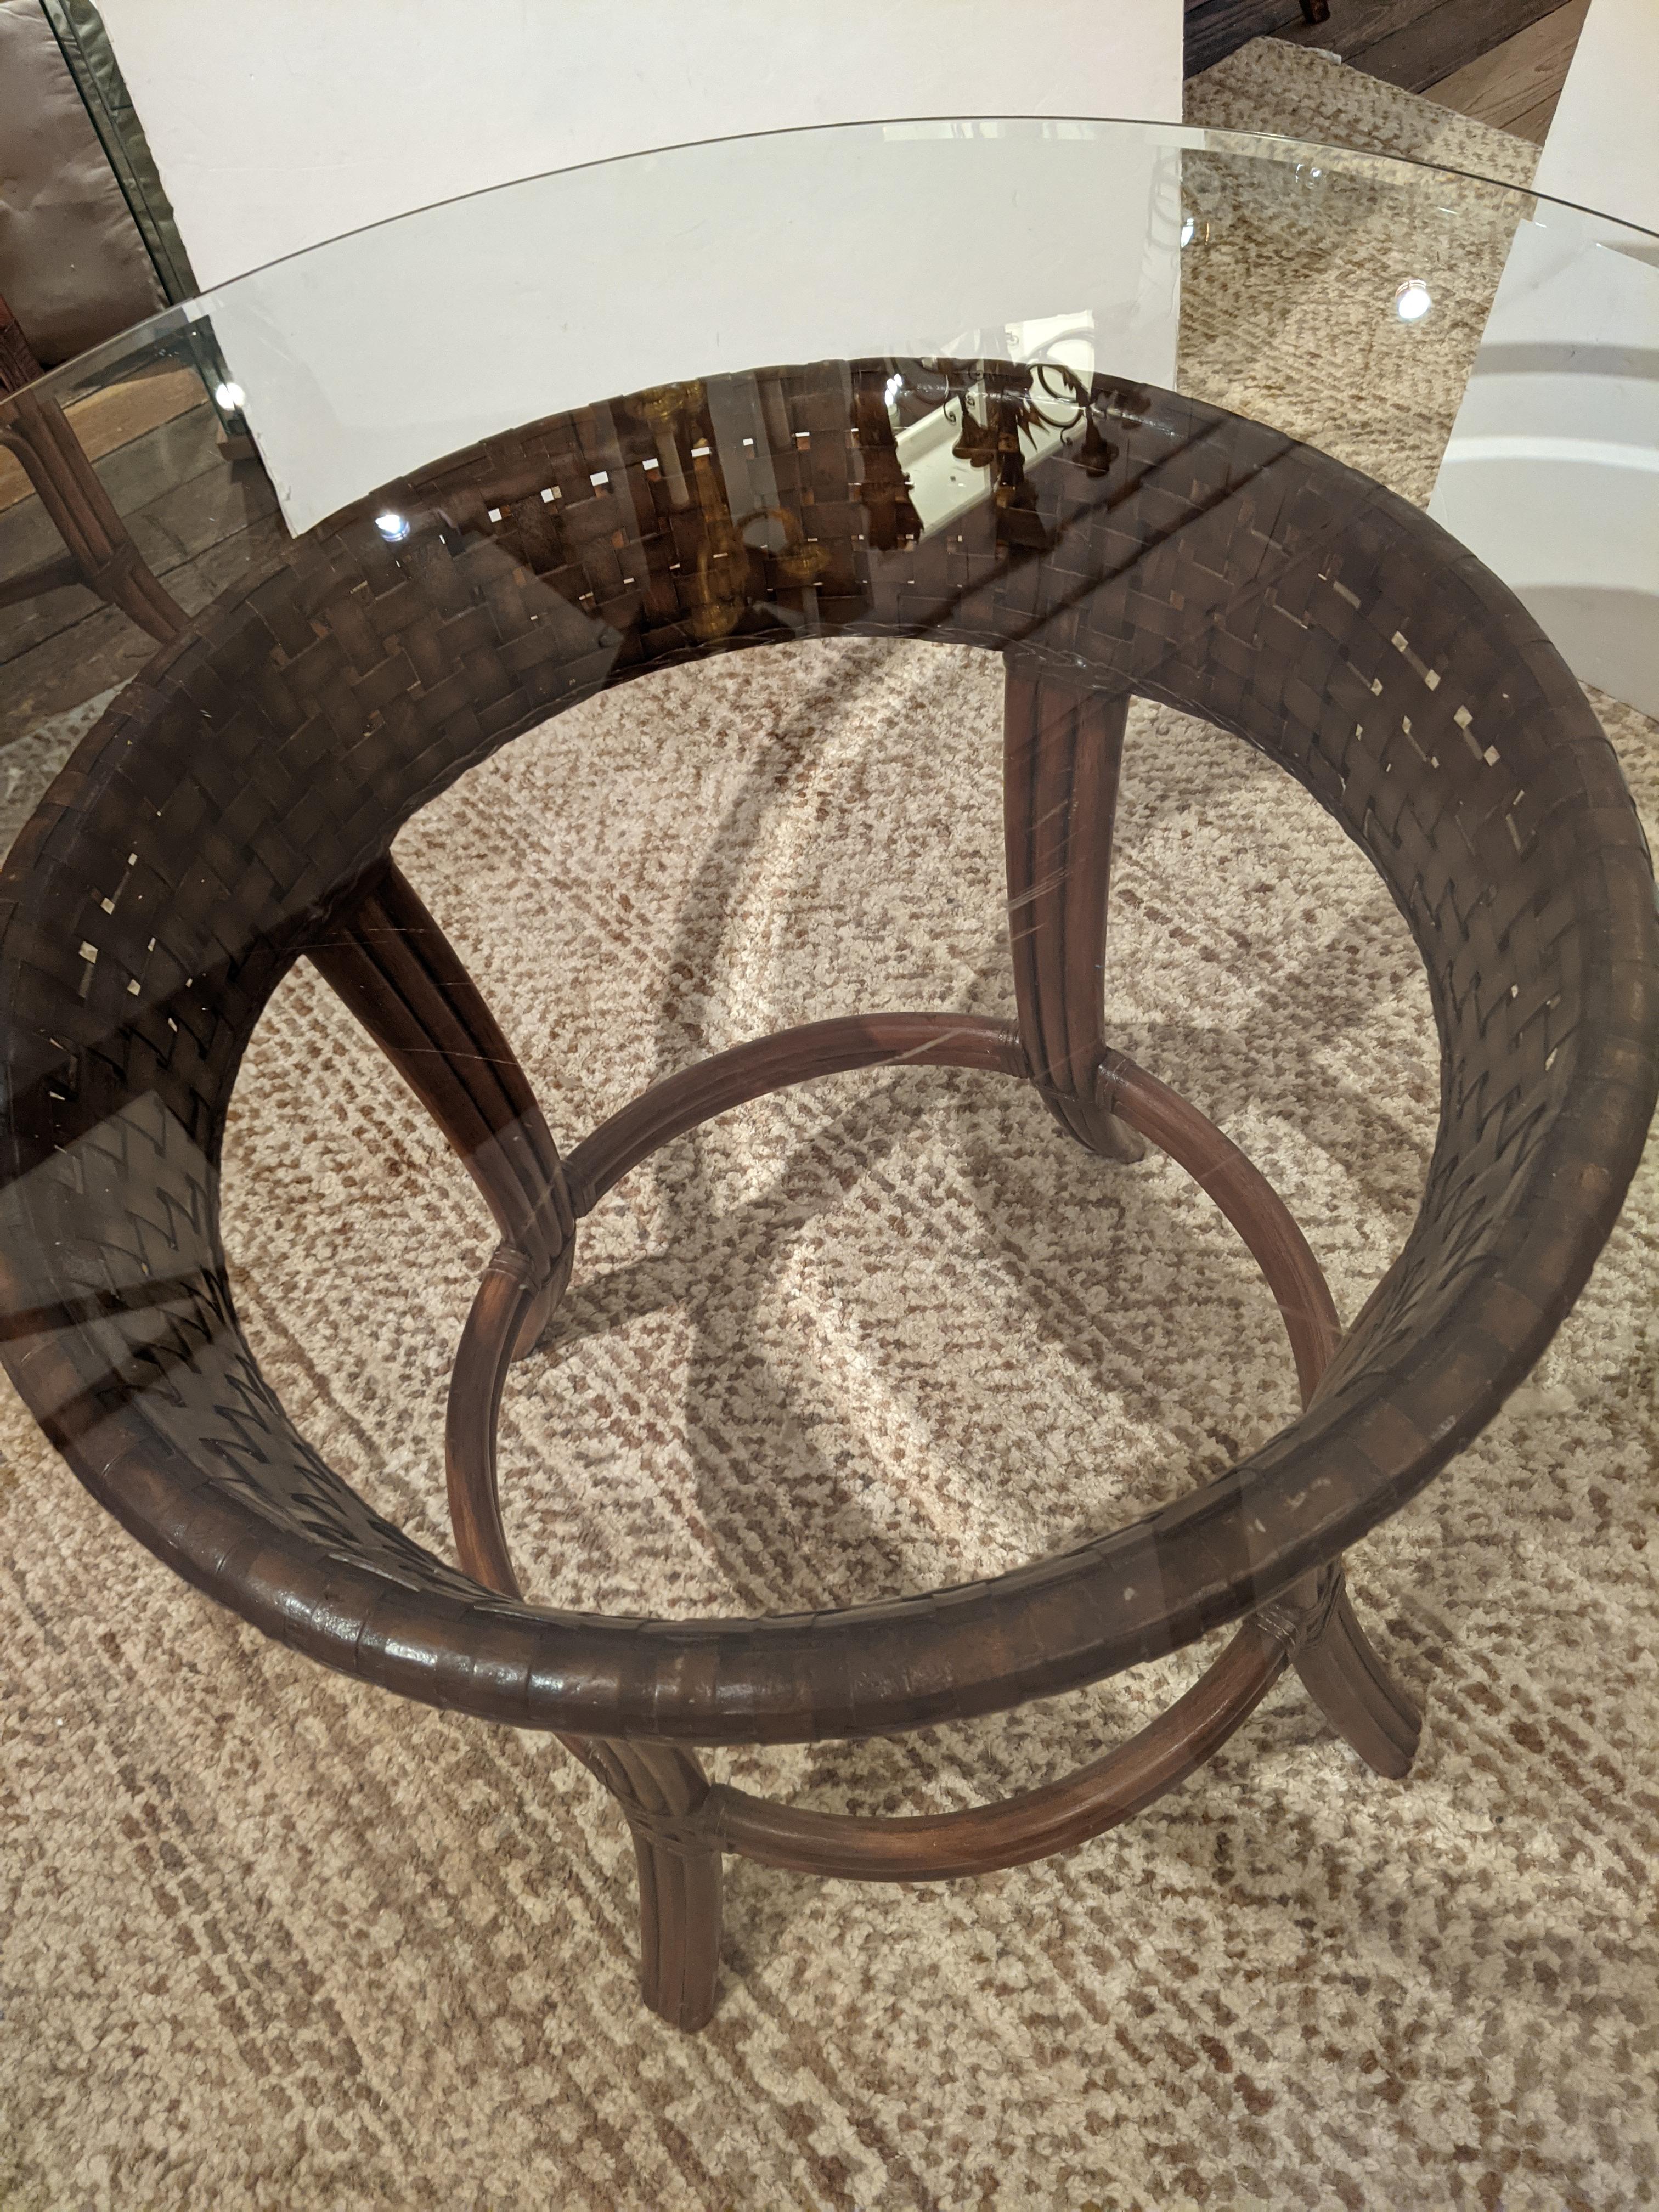 Rich Set of McGuire Round Bamboo Rattan Glass Dining Table & 4 Chairs 3